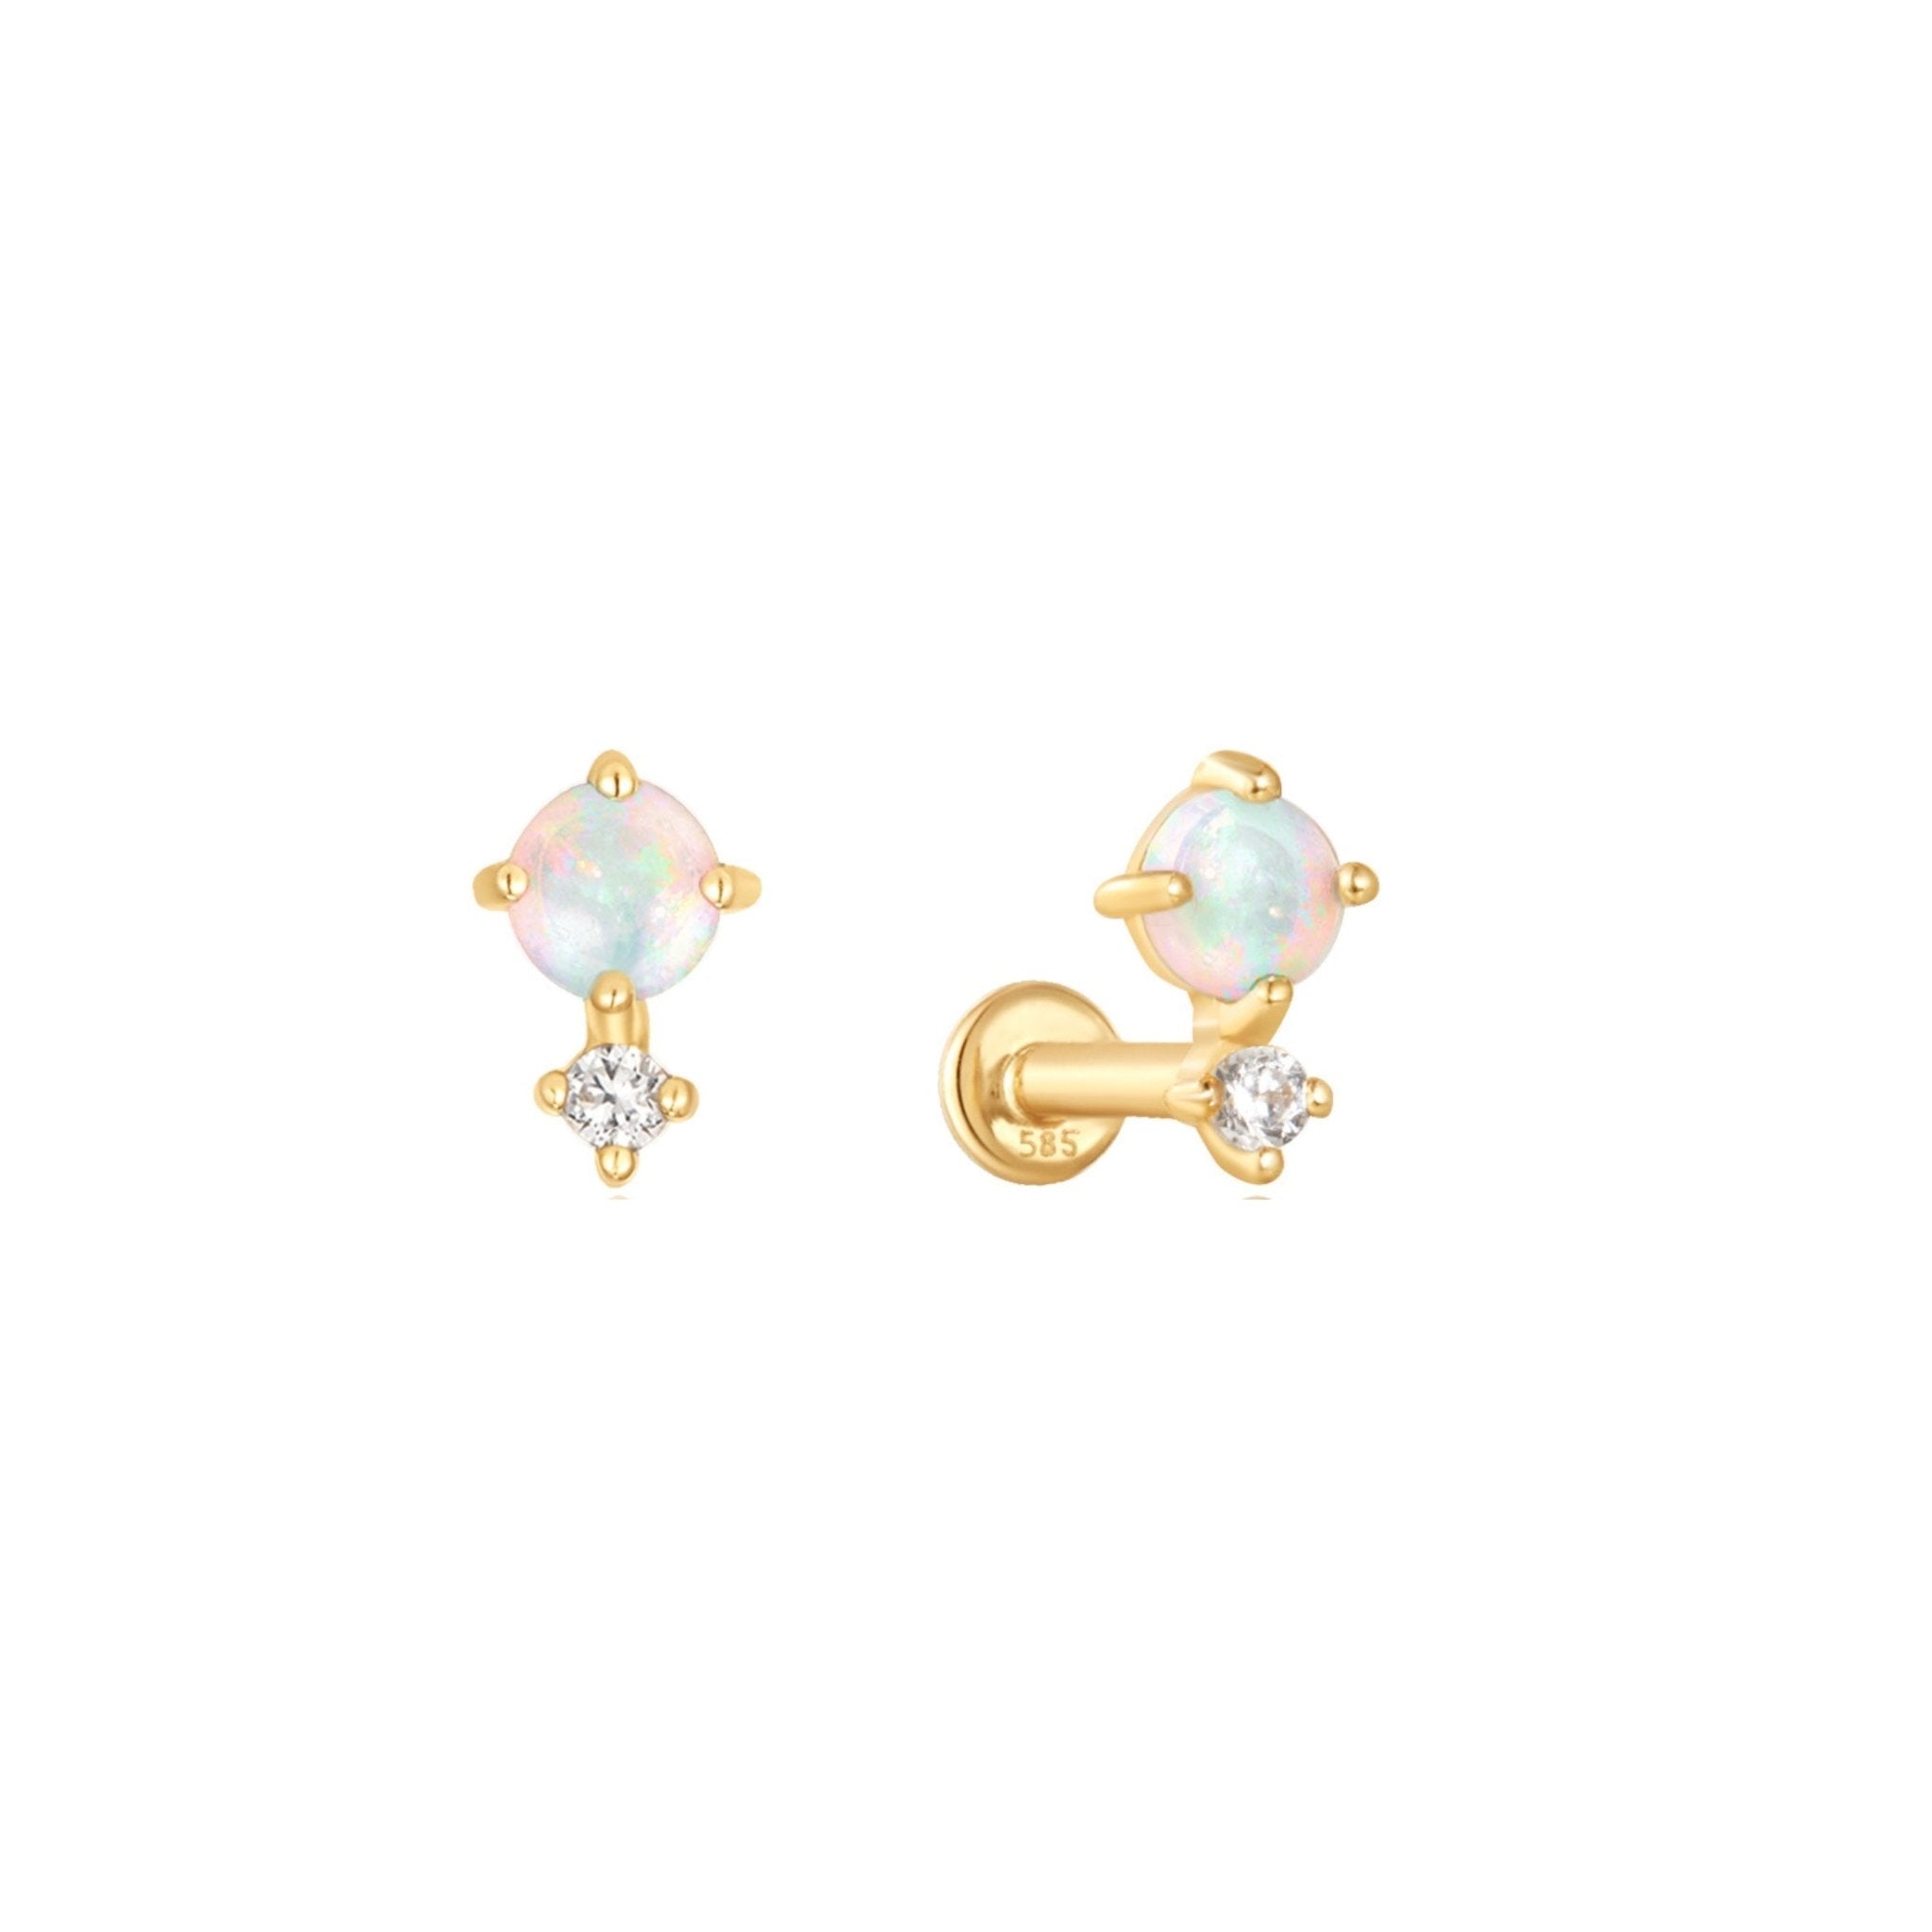 Quinn earrings - five and two jewelry